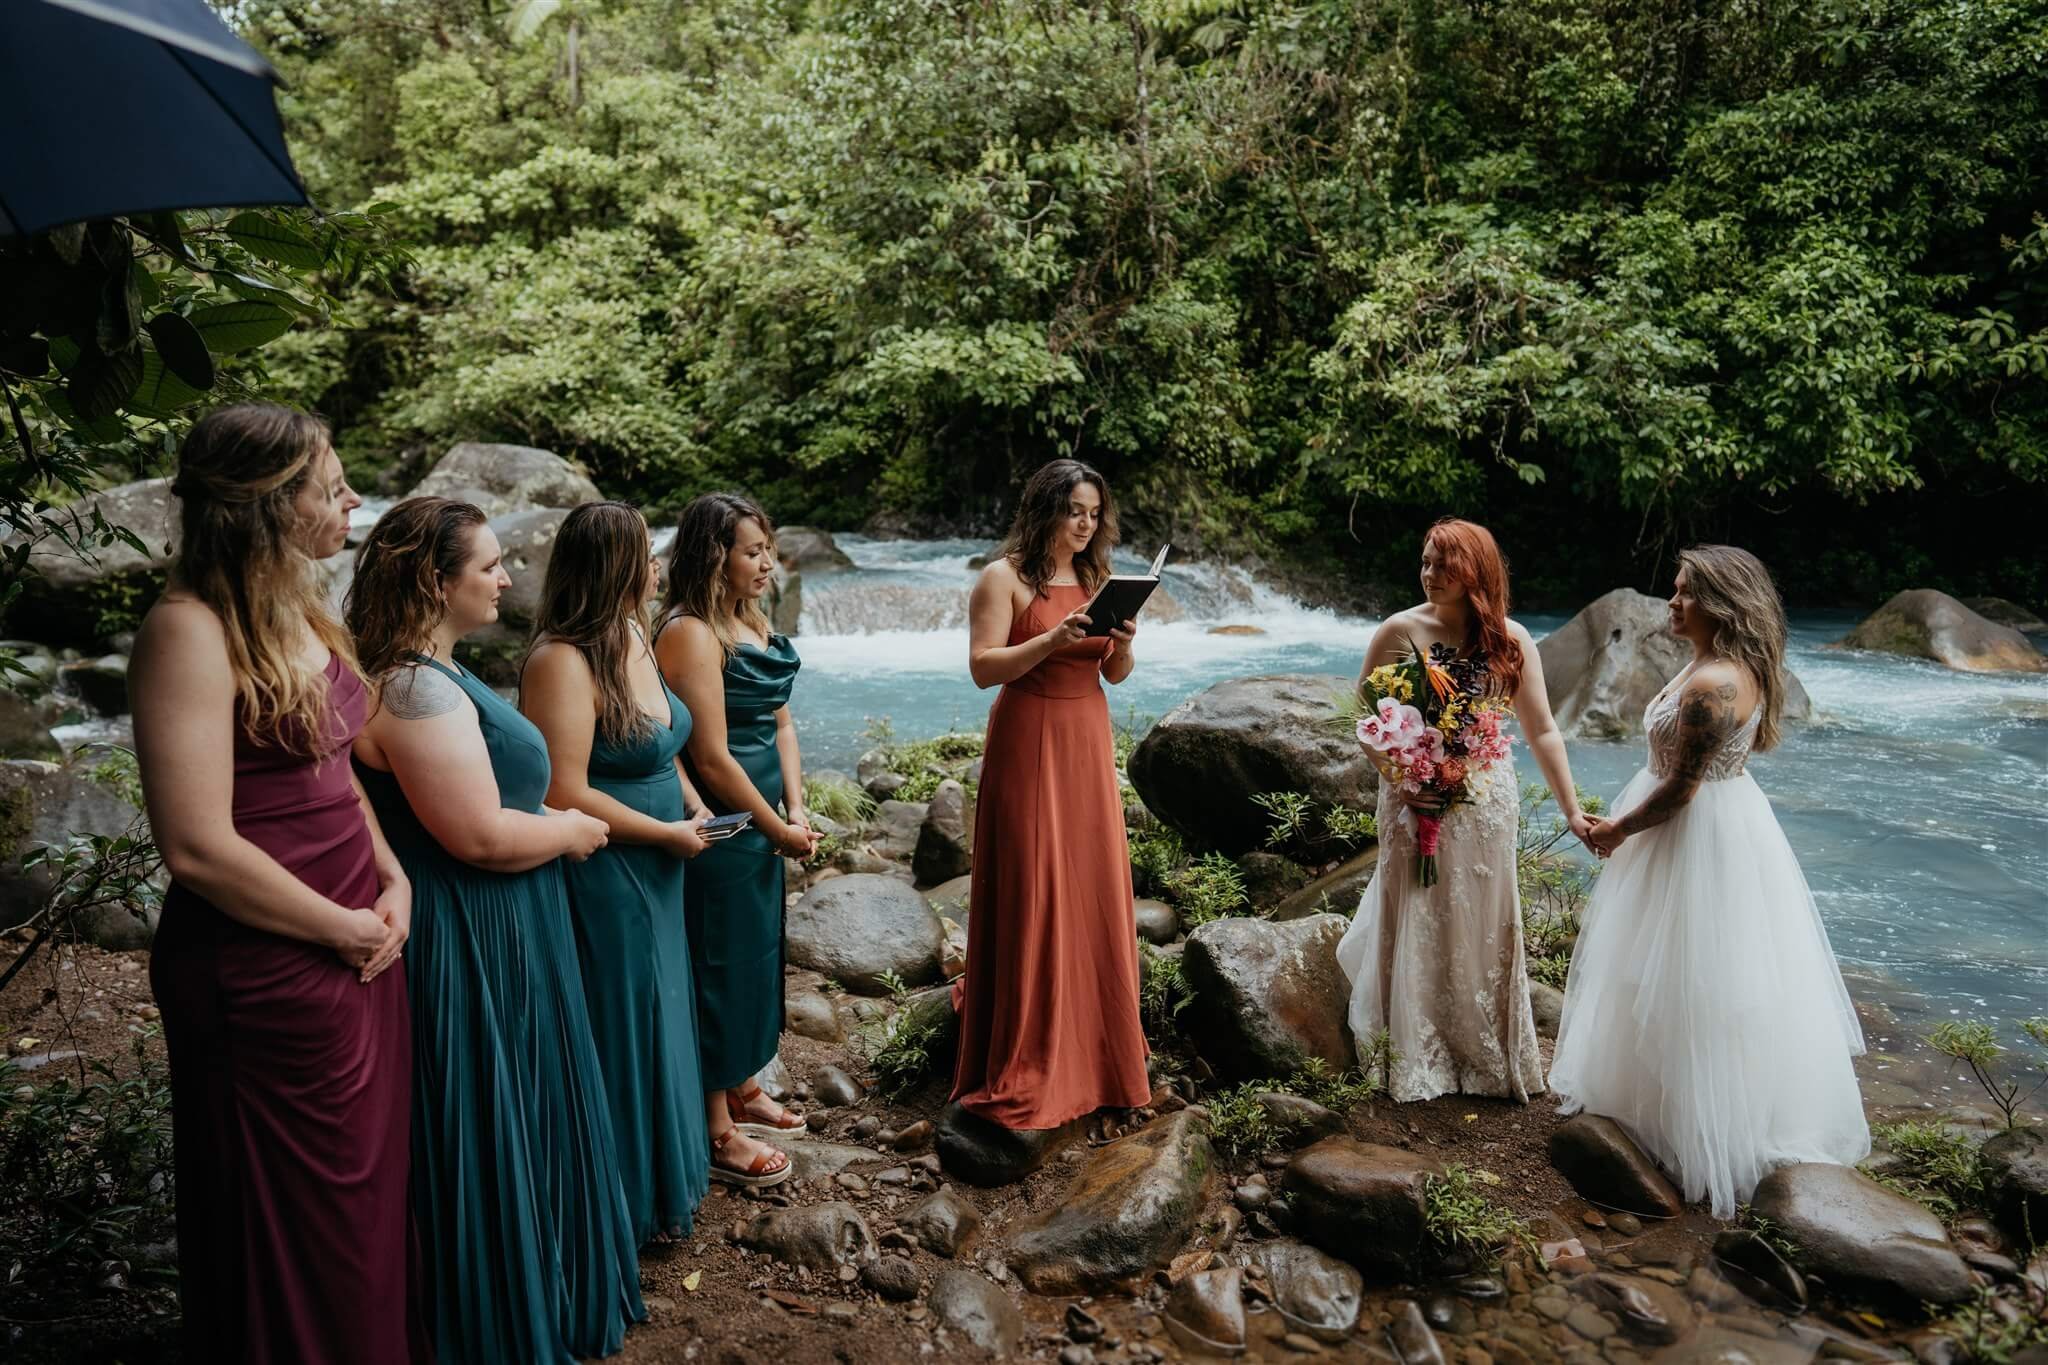 Brides hold hands during adventure wedding ceremony in Costa Rica